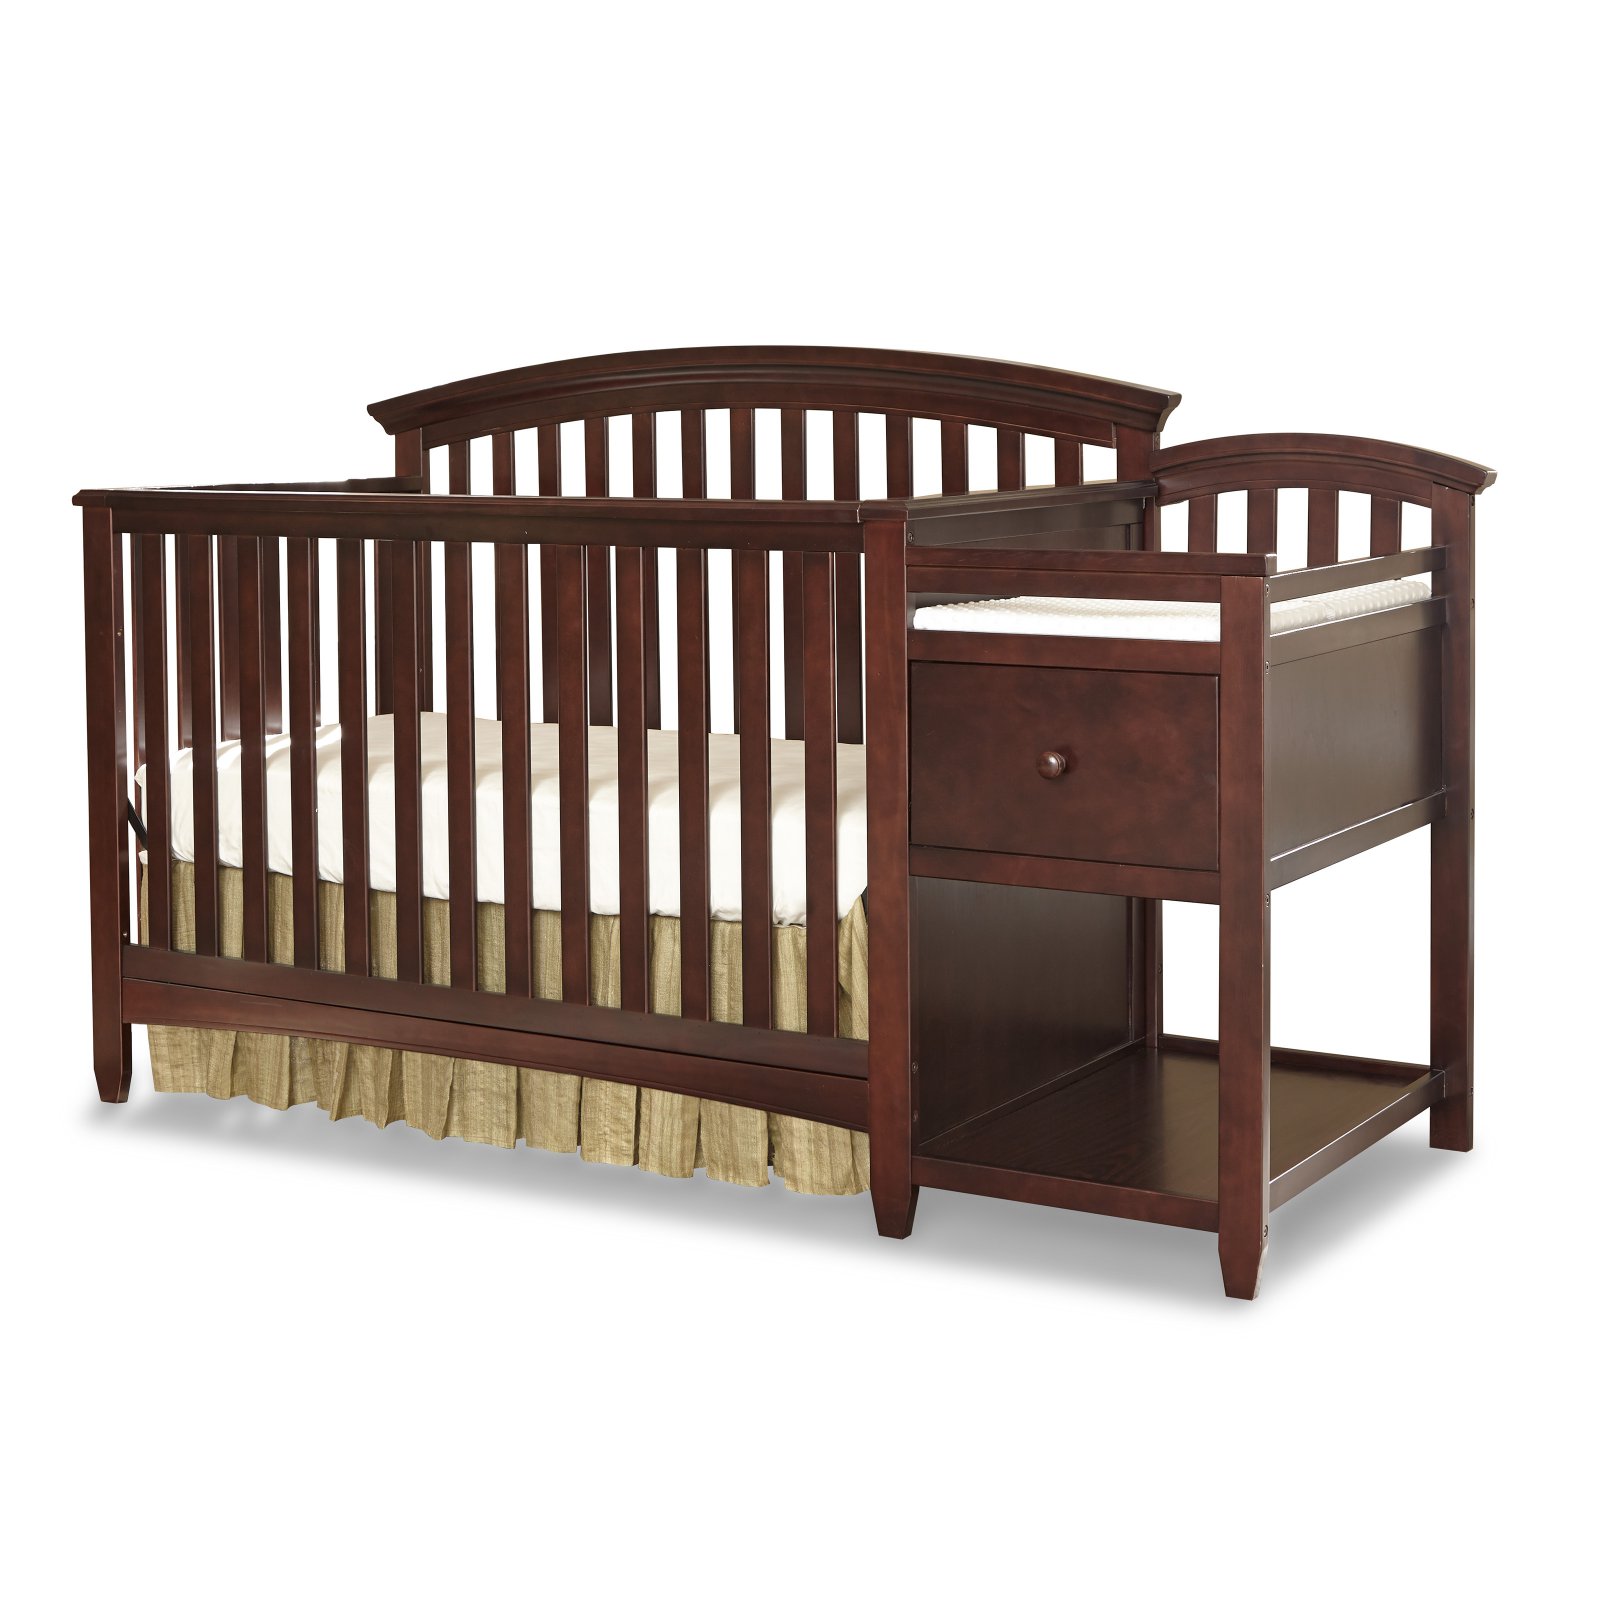 Imagio Baby Montville 4-in-1 Convertible Crib and Changer with Pad, Chocolate Mist - image 1 of 2